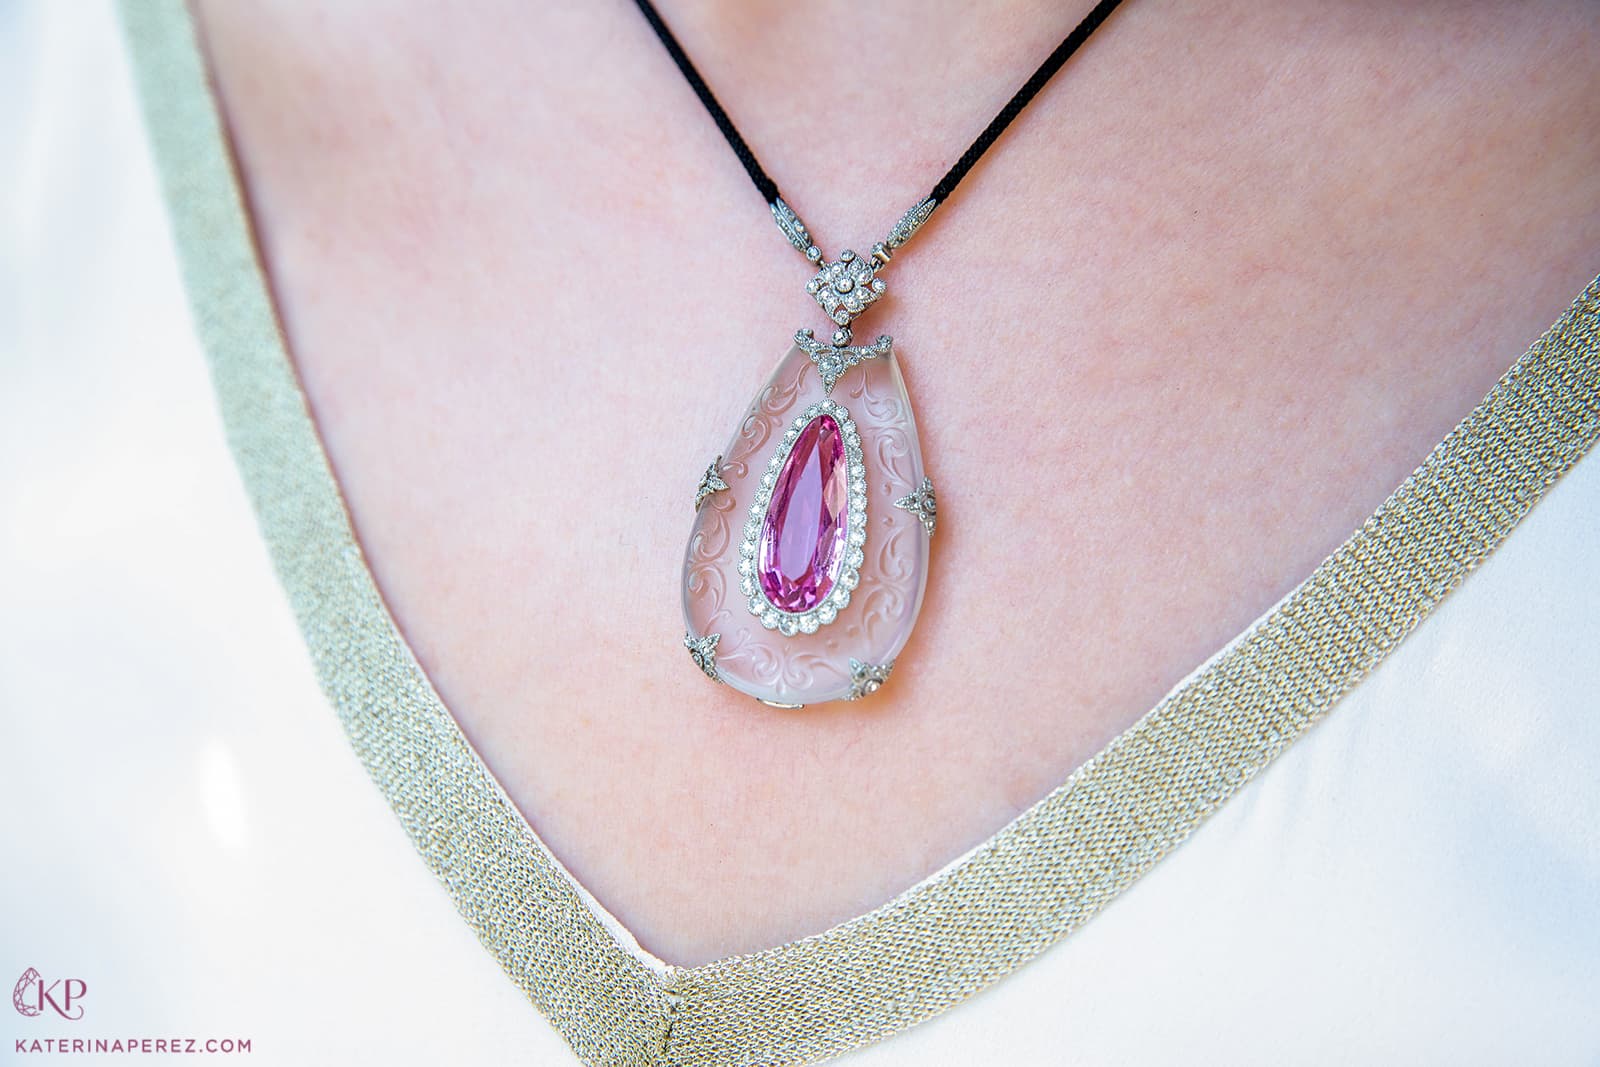 Galerie Montaigne Art Deco necklace, set with a pink topaz and diamonds in carved rock crystal